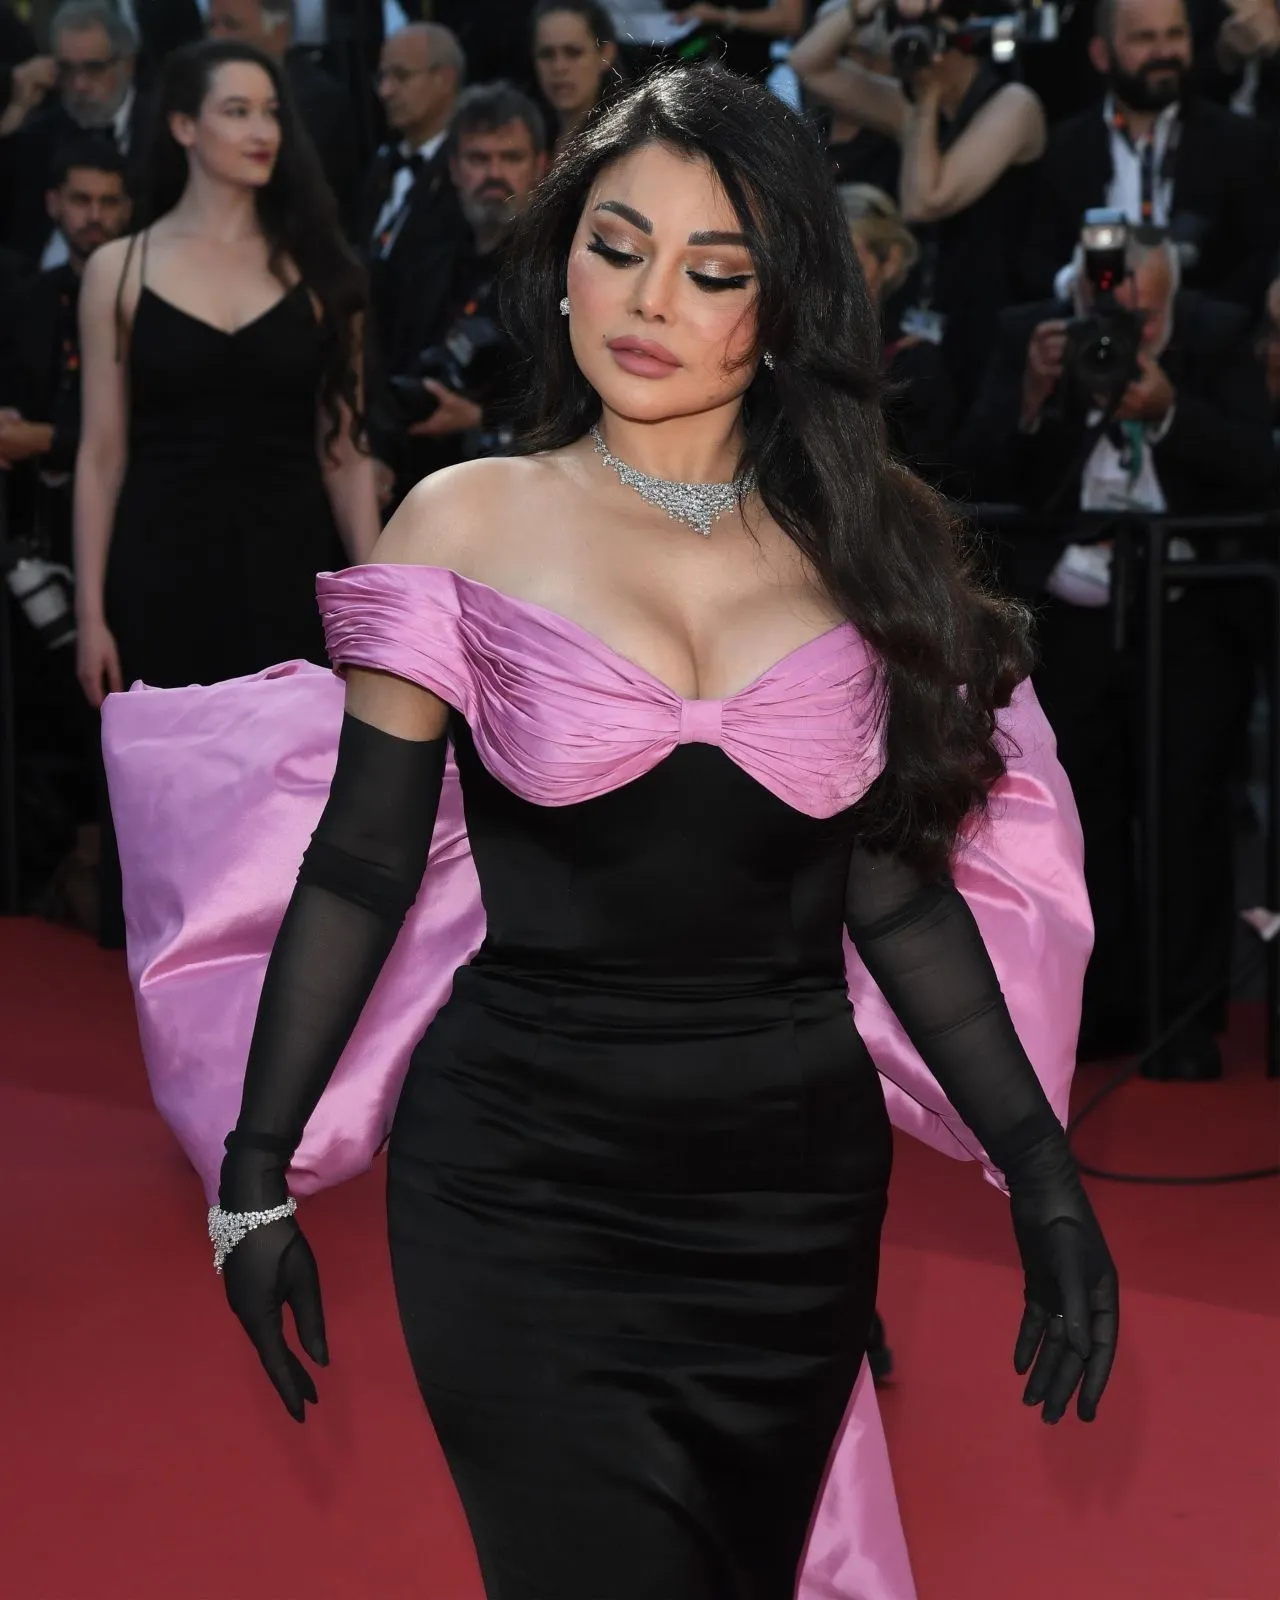 HAIFA WEHBE AT THE COUNT OF MONTE CRISTO PREMIERE AT CANNES FILM FESTIVAL7